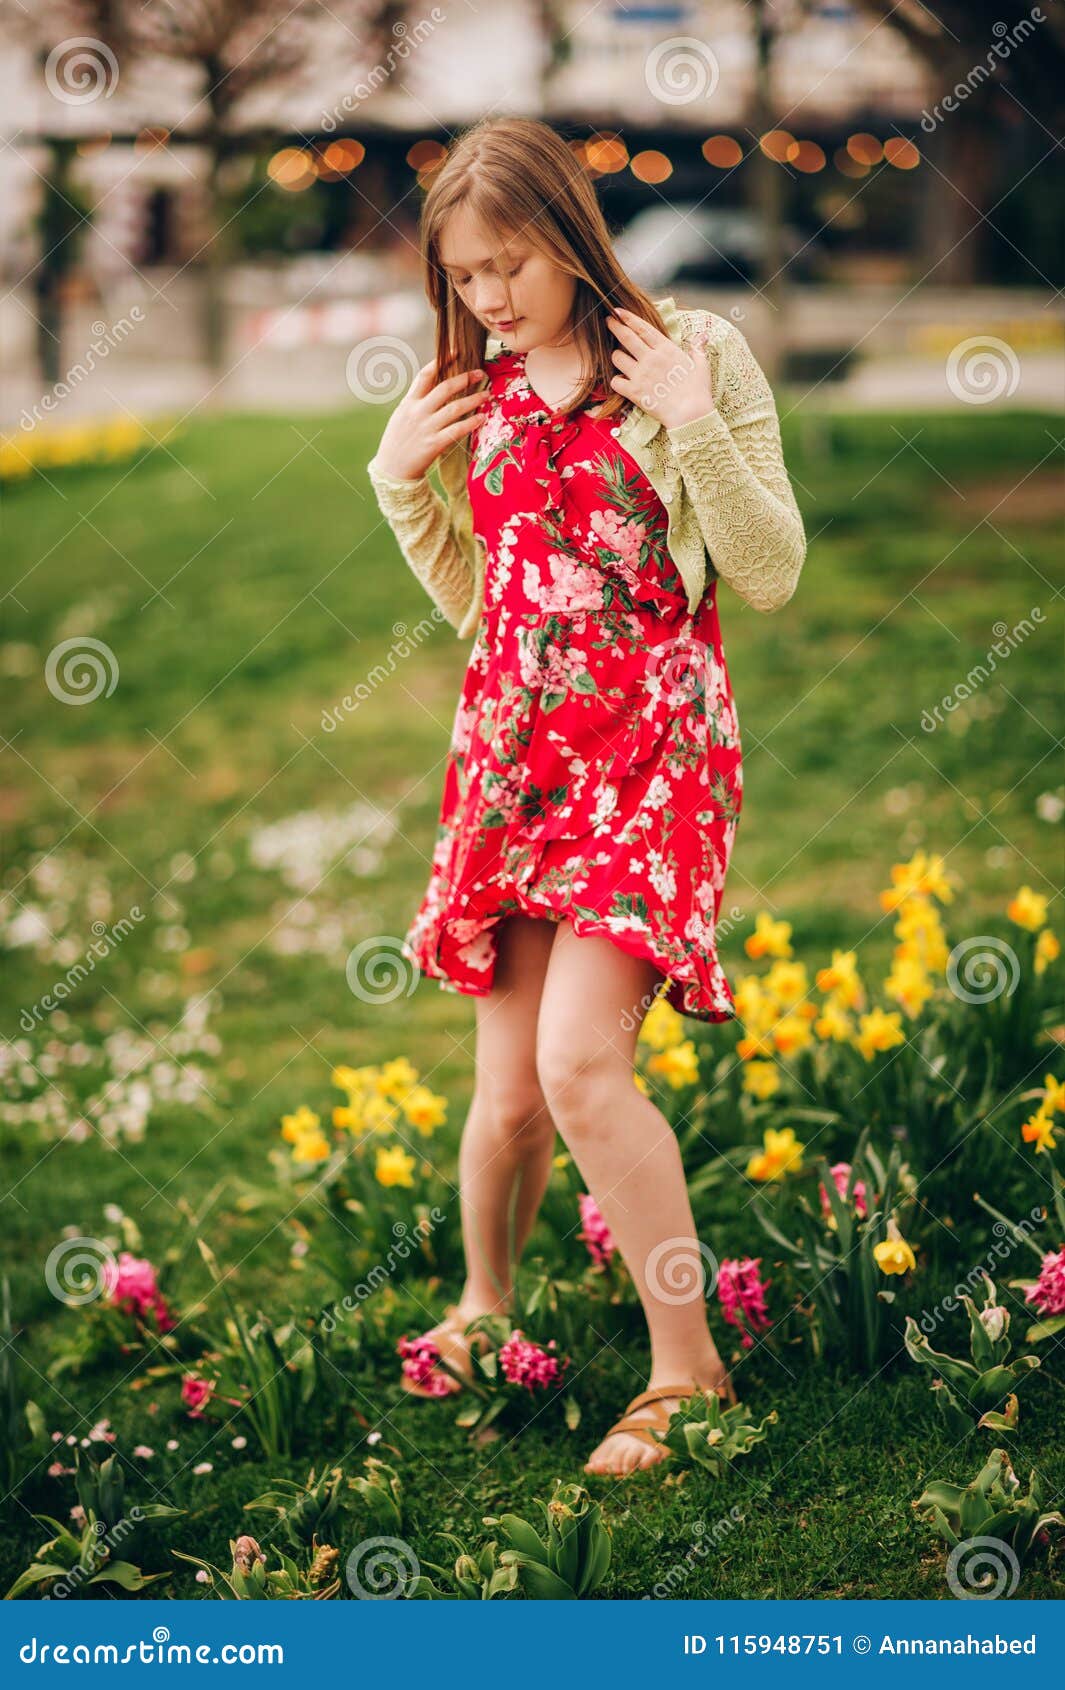 Outdoor Fashion Portrait Of Cute Preteen Girl Stock Image ...